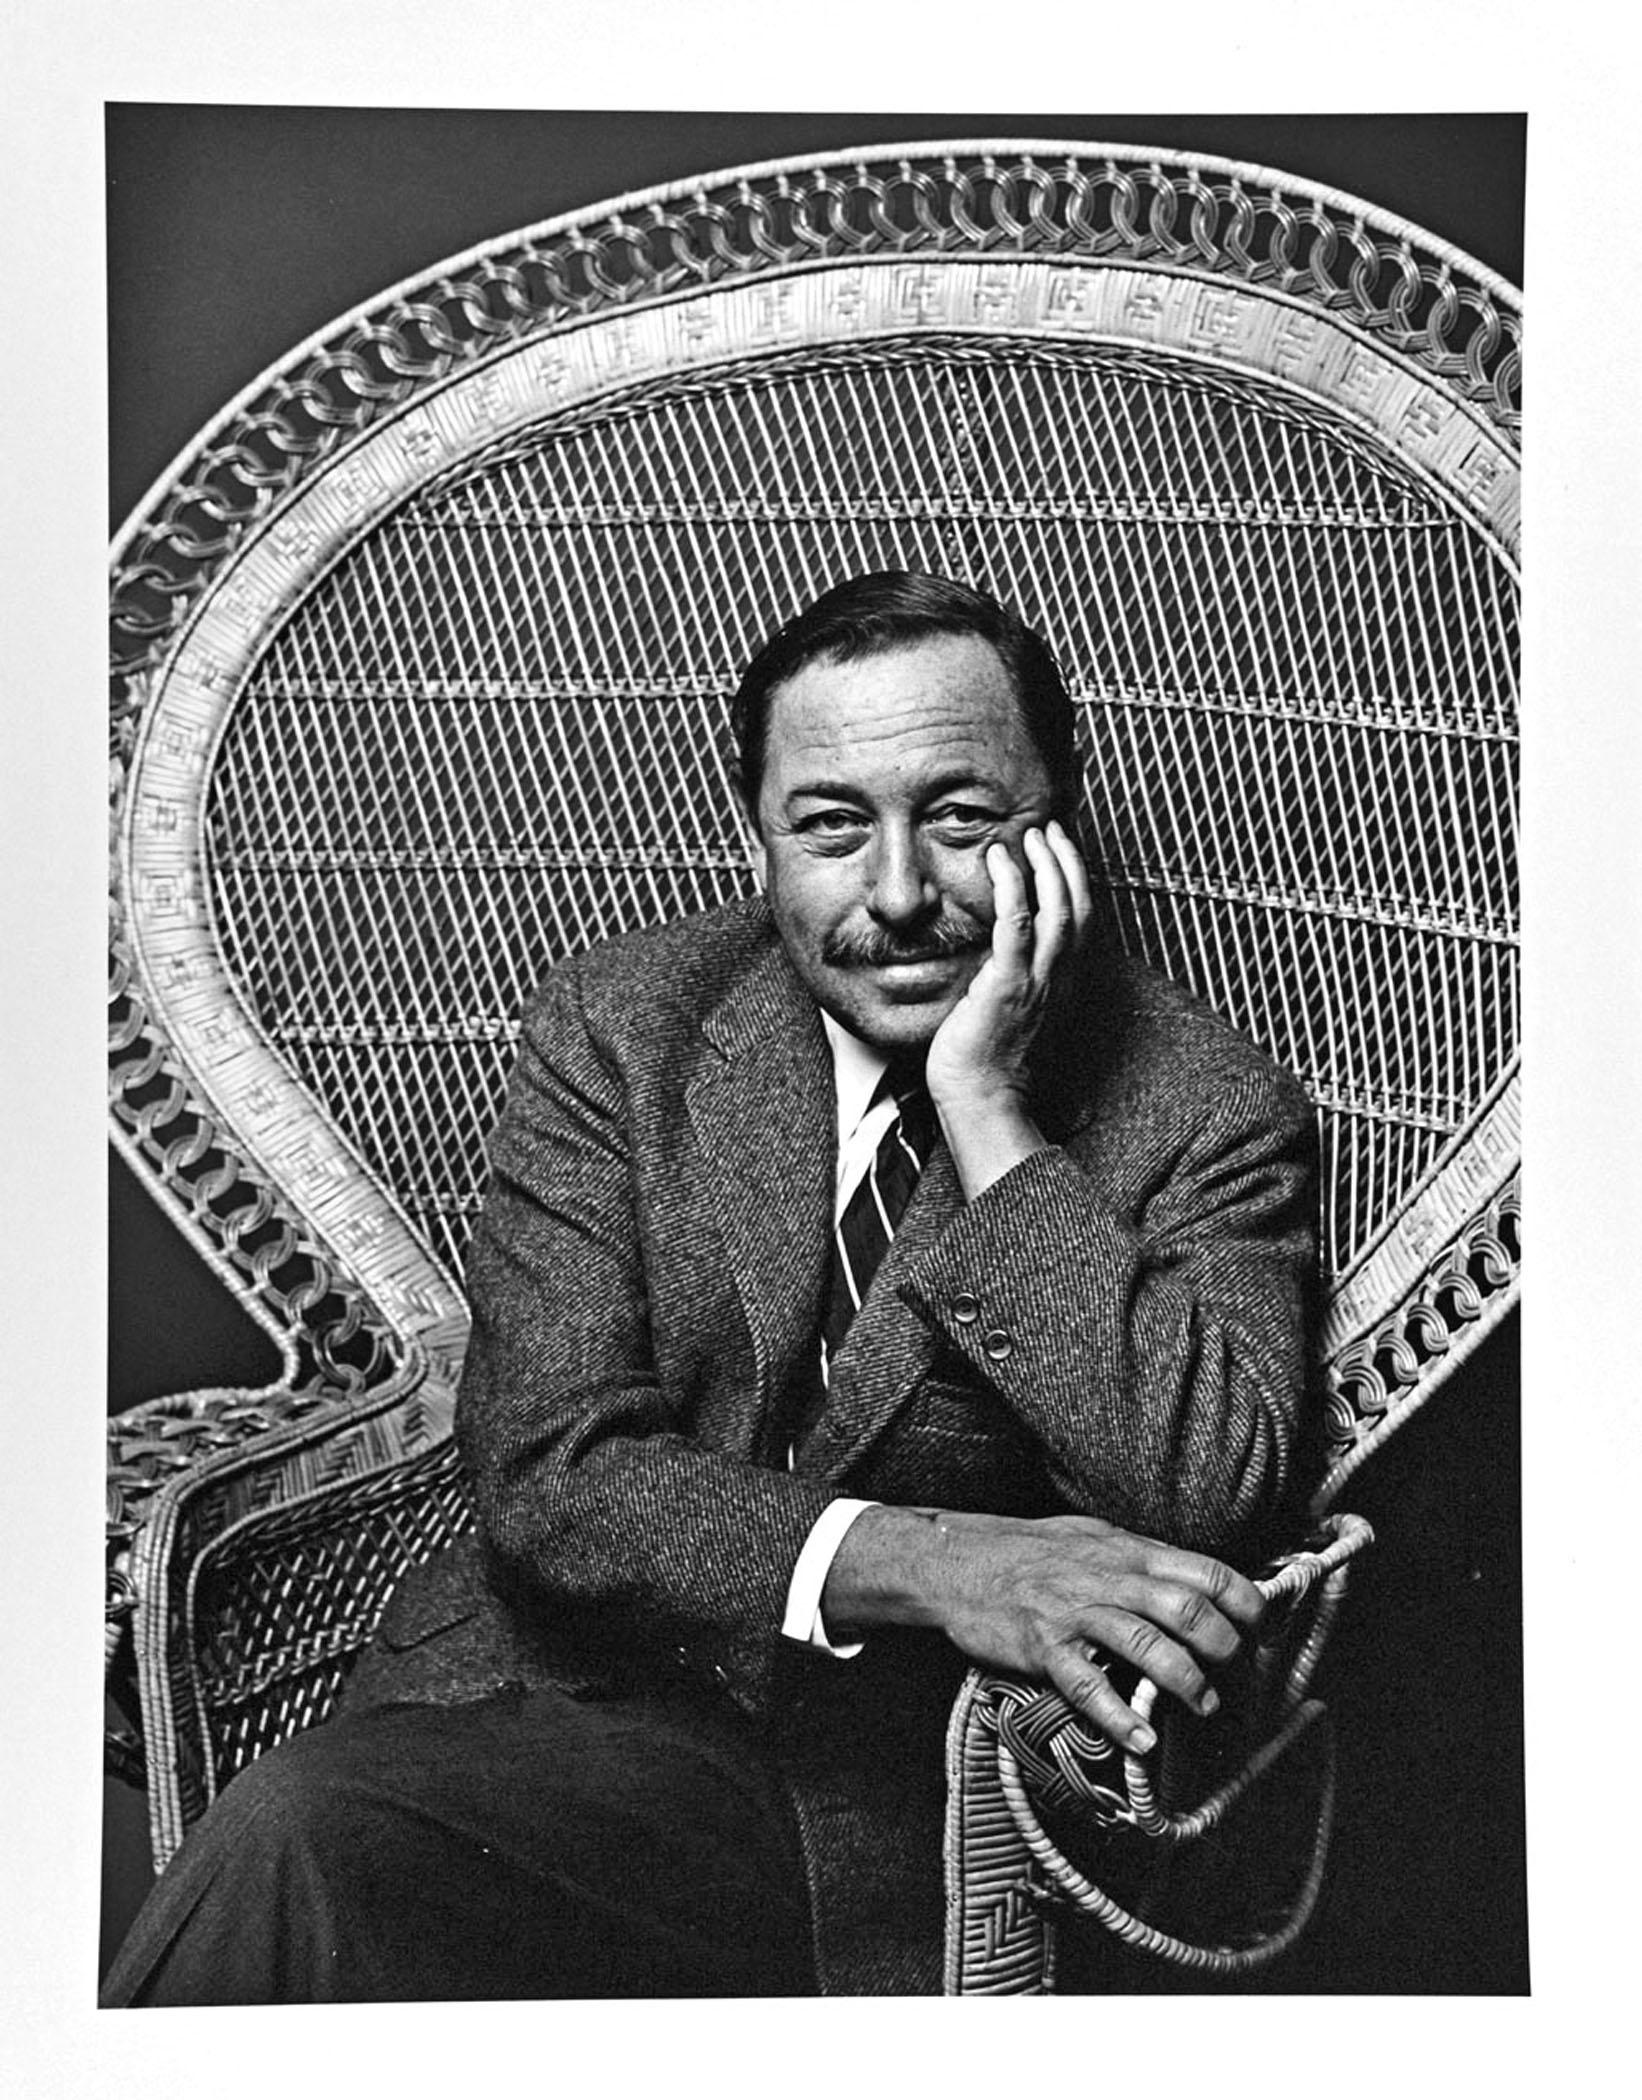 Jack Mitchell Black and White Photograph - Pulitzer prize-winning playwright Tennessee Williams